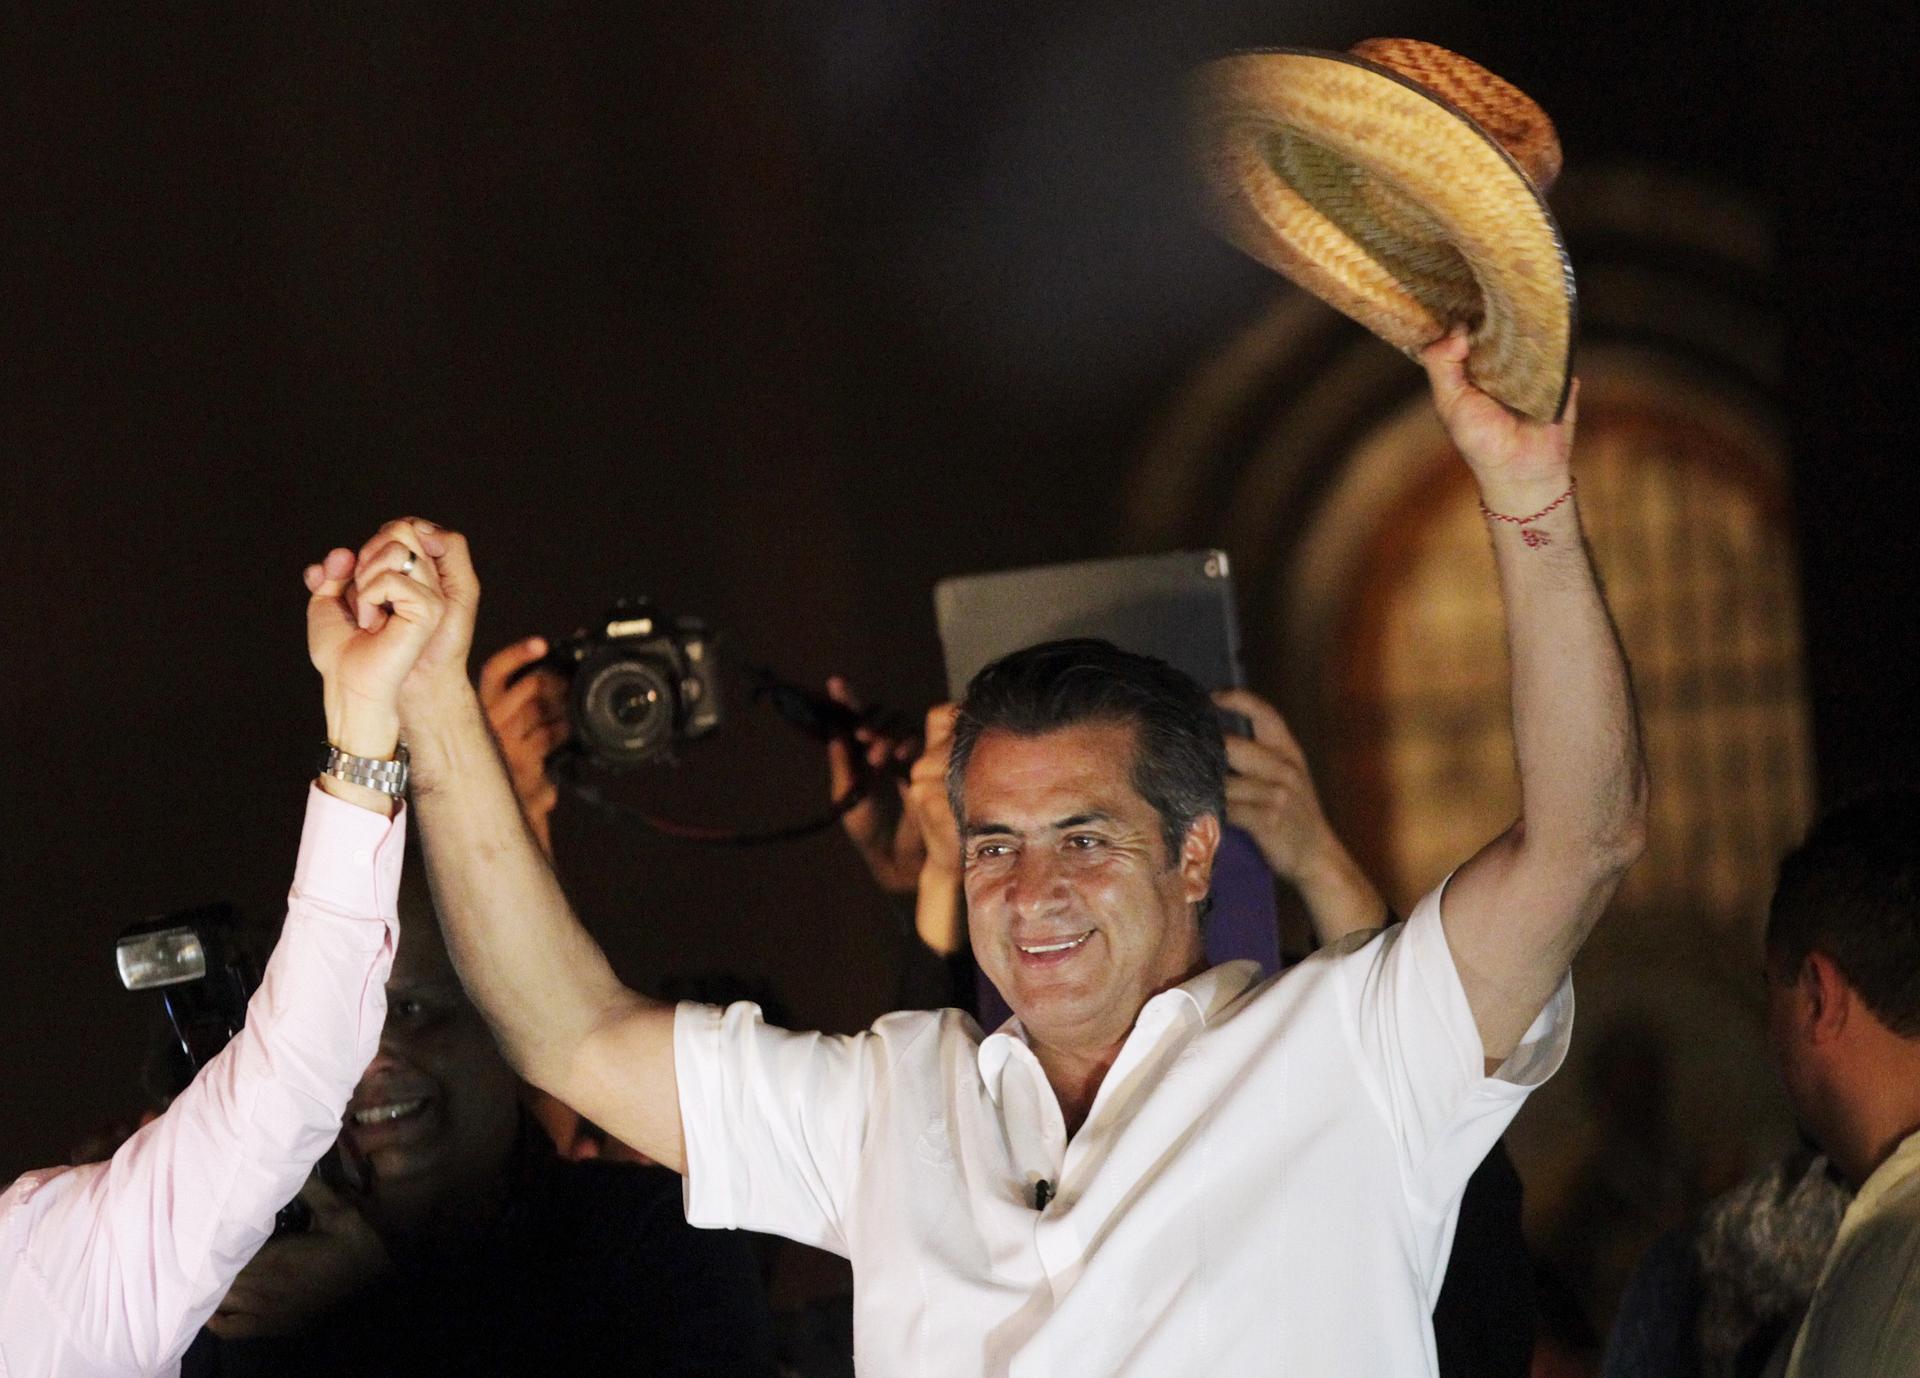 Jaime Rodriguez, known as “El Bronco,” an independent candidate for governor of Nuevo Leon state, celebrates his victory after midterm elections, June 7, 2015.